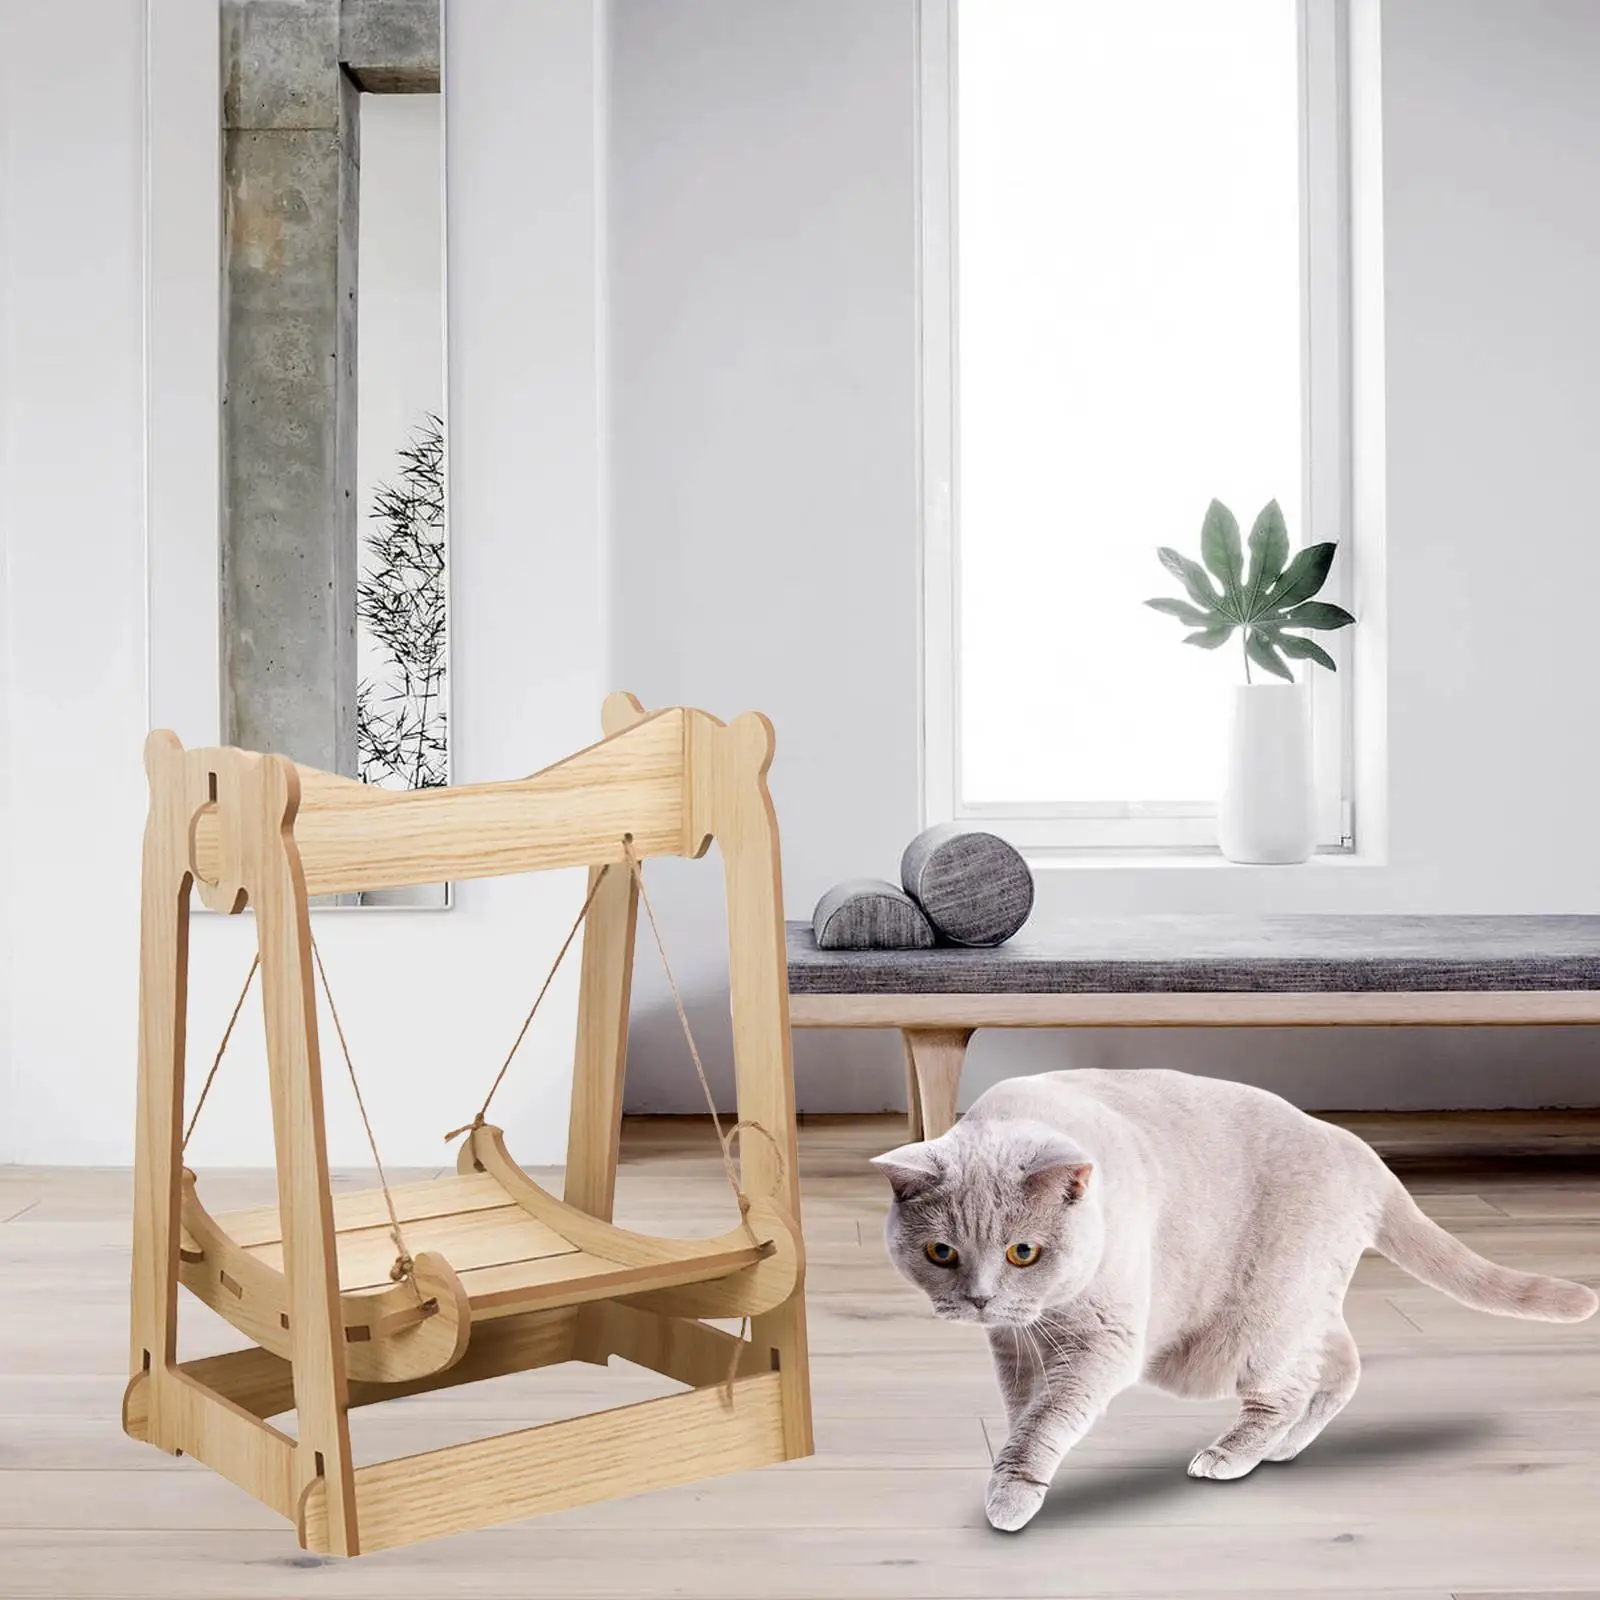 Wooden Cat Hammock Bed Scratching Rope Pet Swing Chair for Kitten, Wood Construction